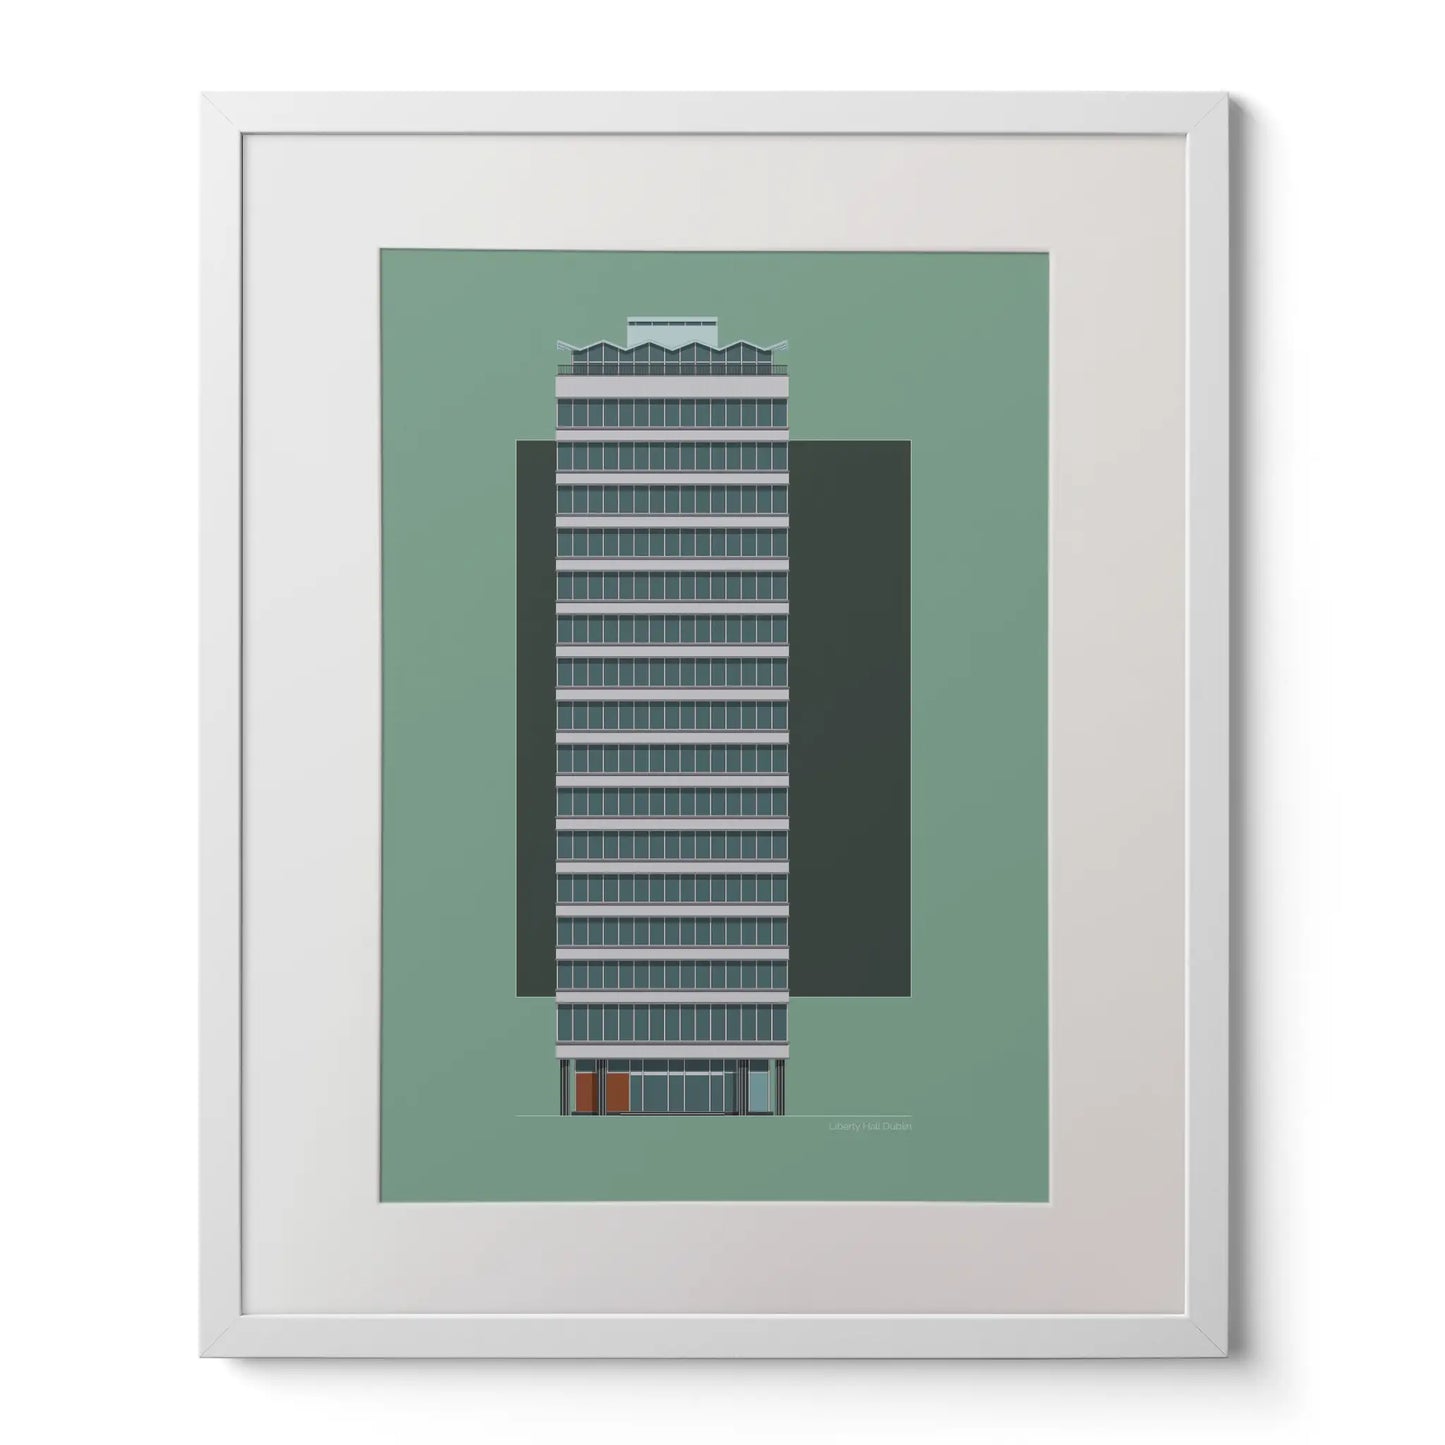 Contemporary drawing as framed wall art of Liberty Hall in Dublin, Ireland